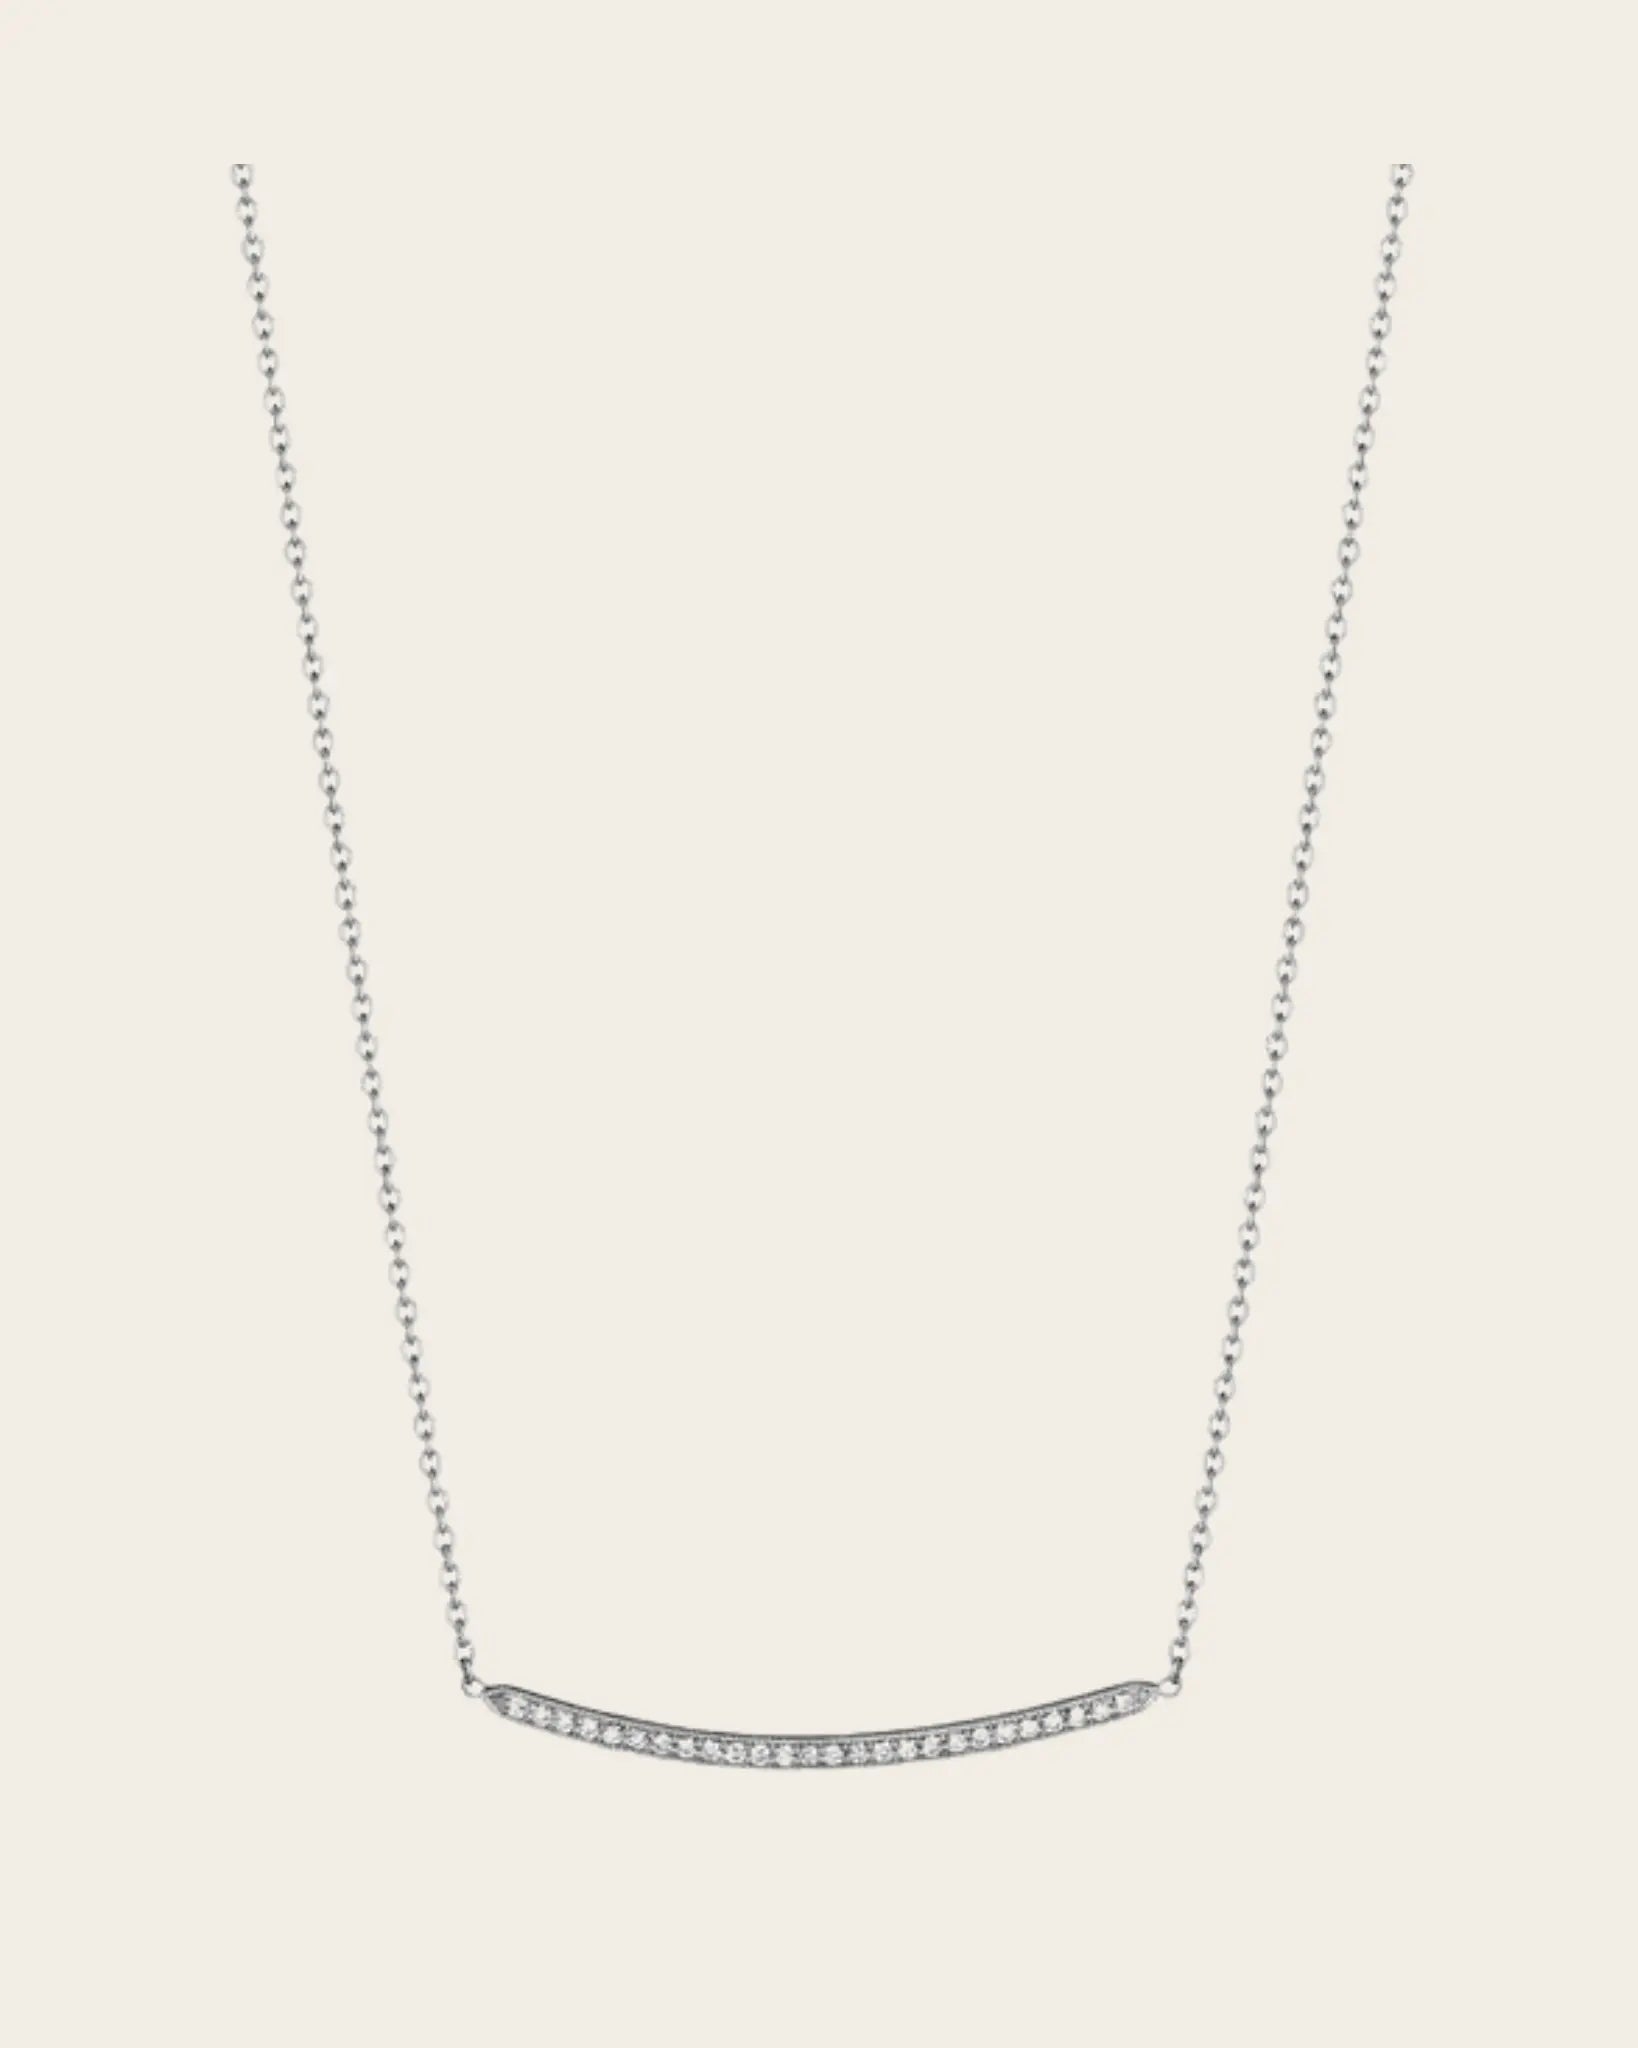 Petite Forever Bar Necklace Petite Forever Bar Necklace Penny Preville Penny Preville  Squash Blossom Vail